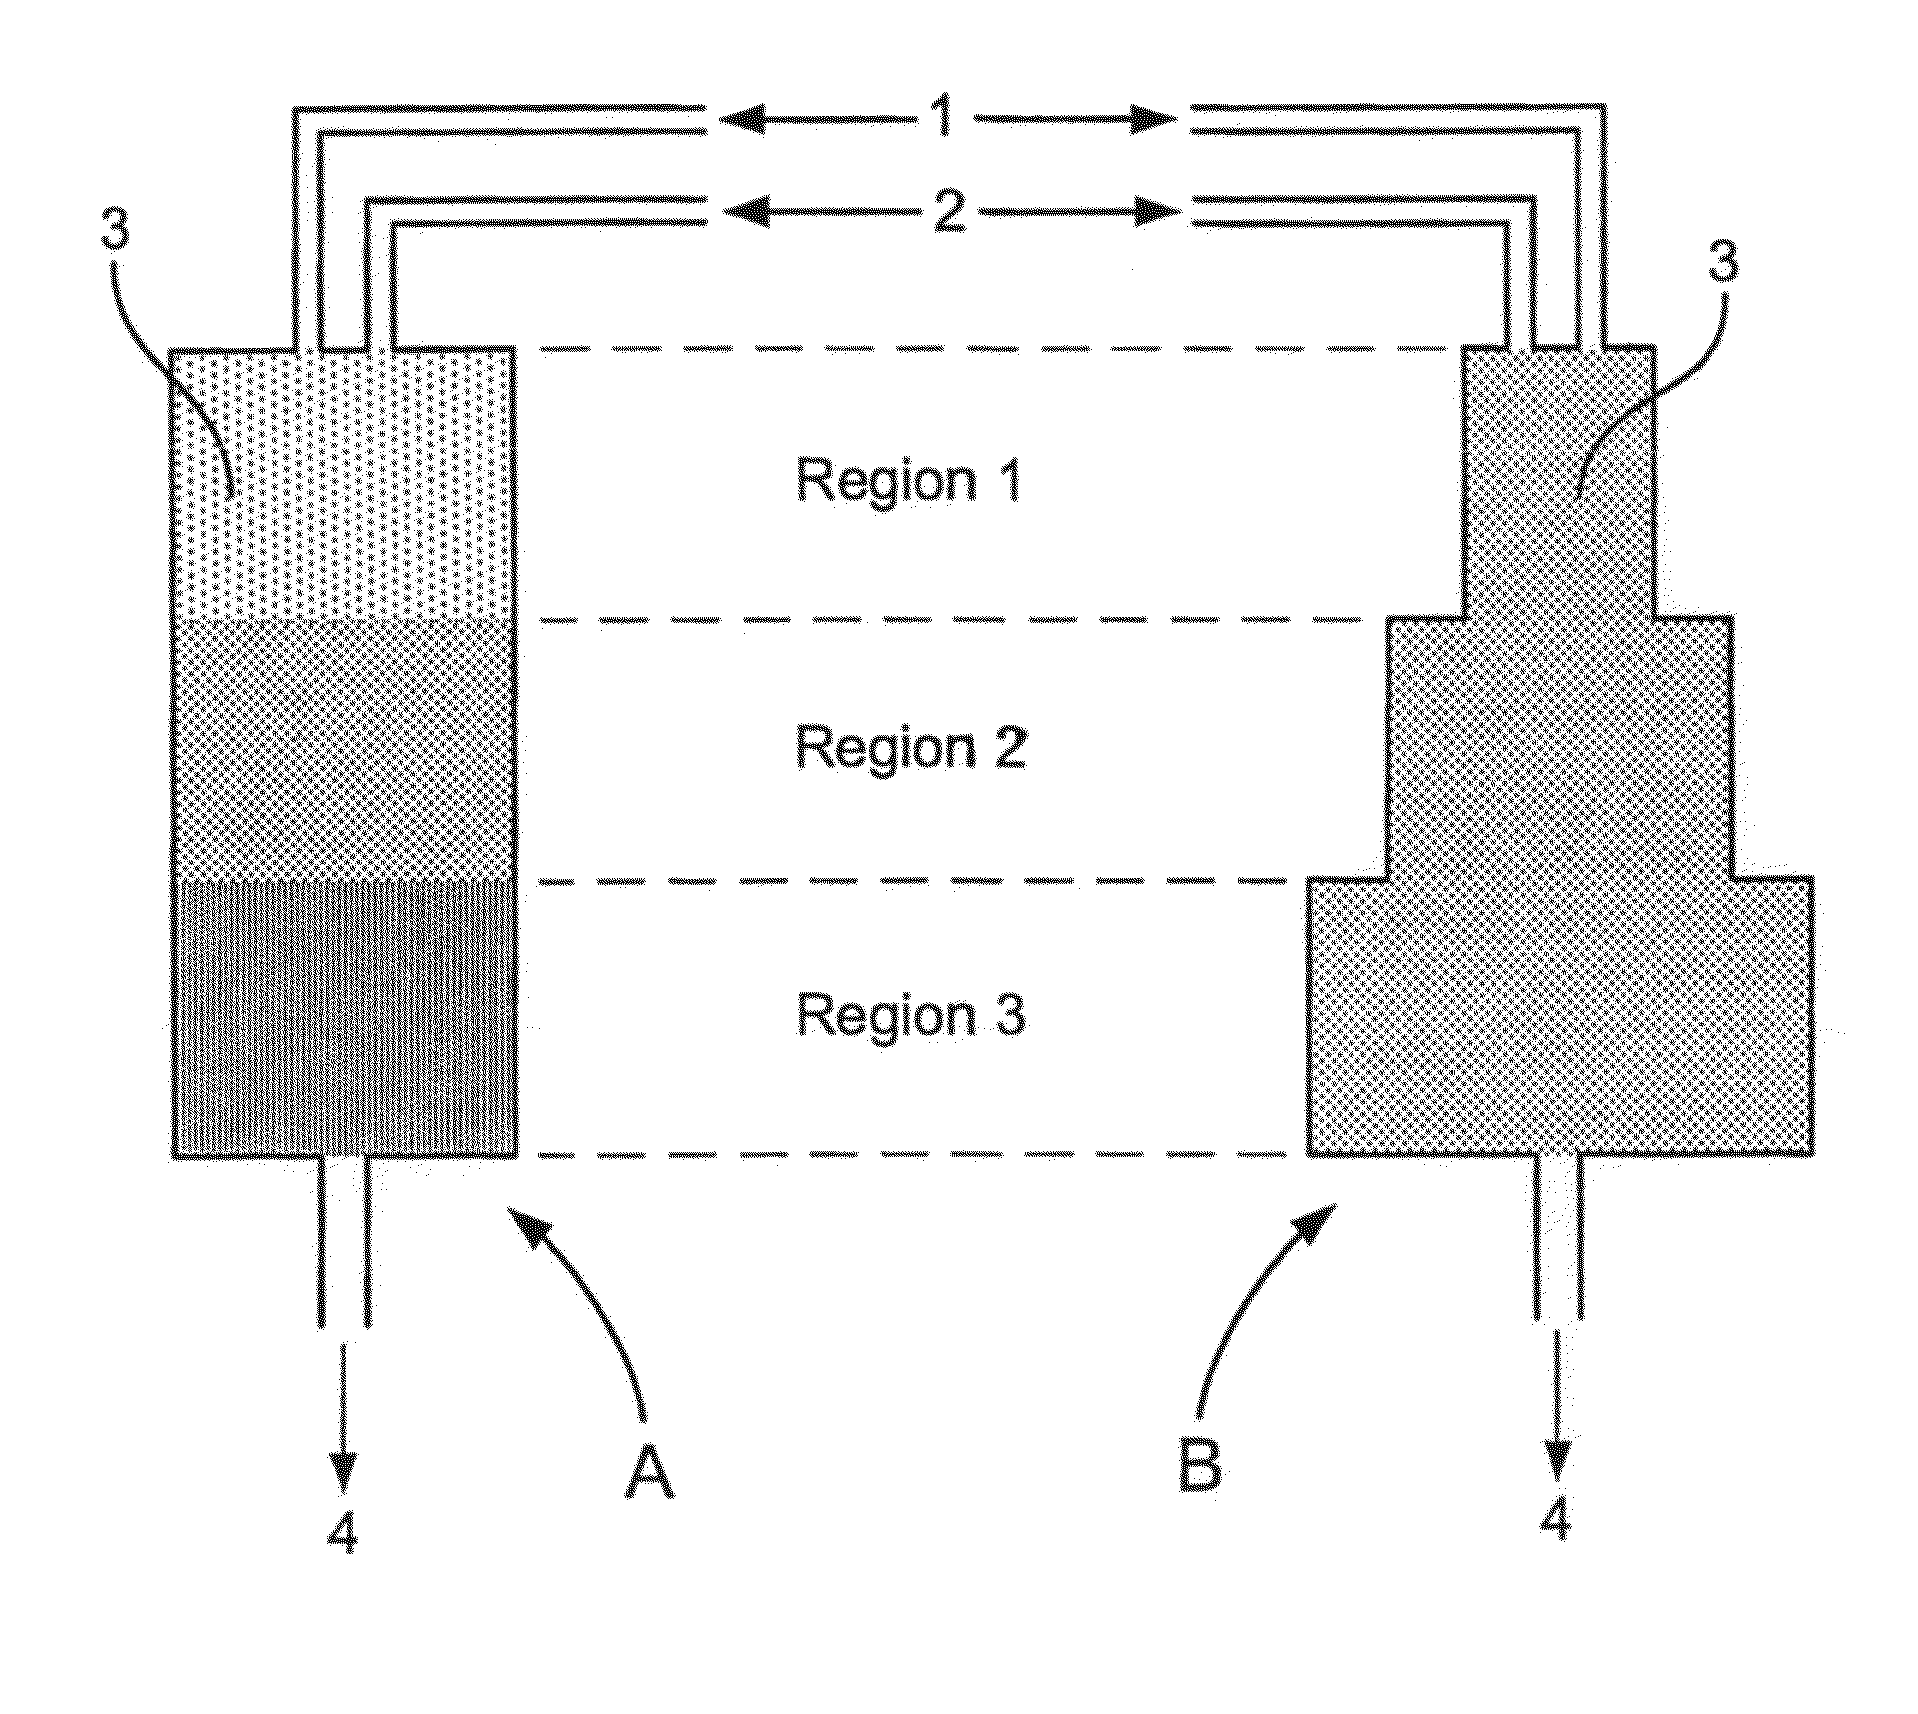 Process for producing condensed-phase product from one or more gas-phase reactants